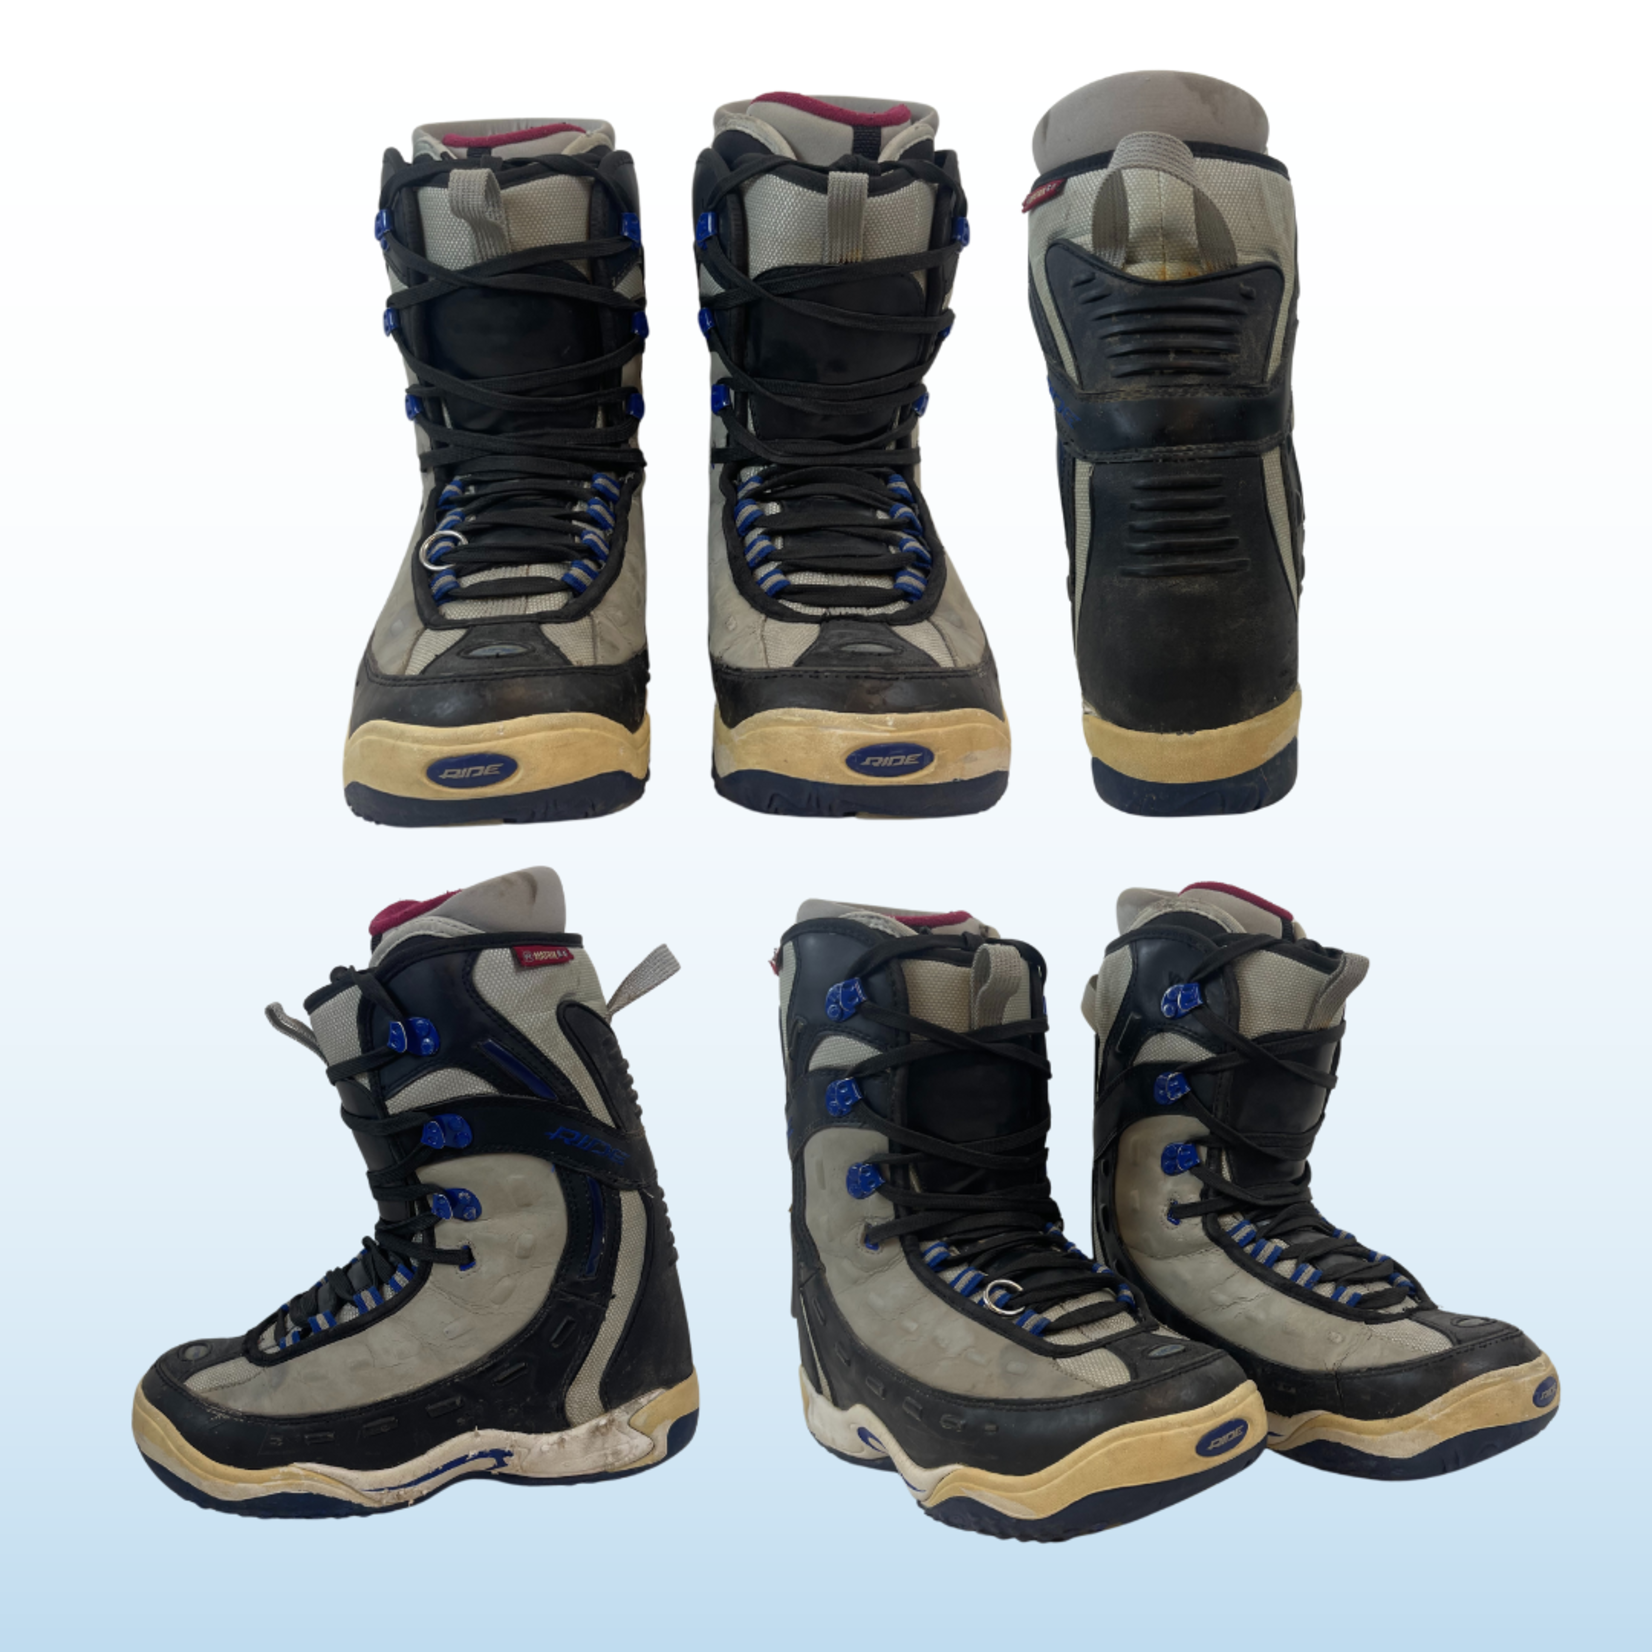 Ride Ion Snowboard Boots, Size 9 MENS, SOLD AS IS NO REFUNDS OR EXCHANGES